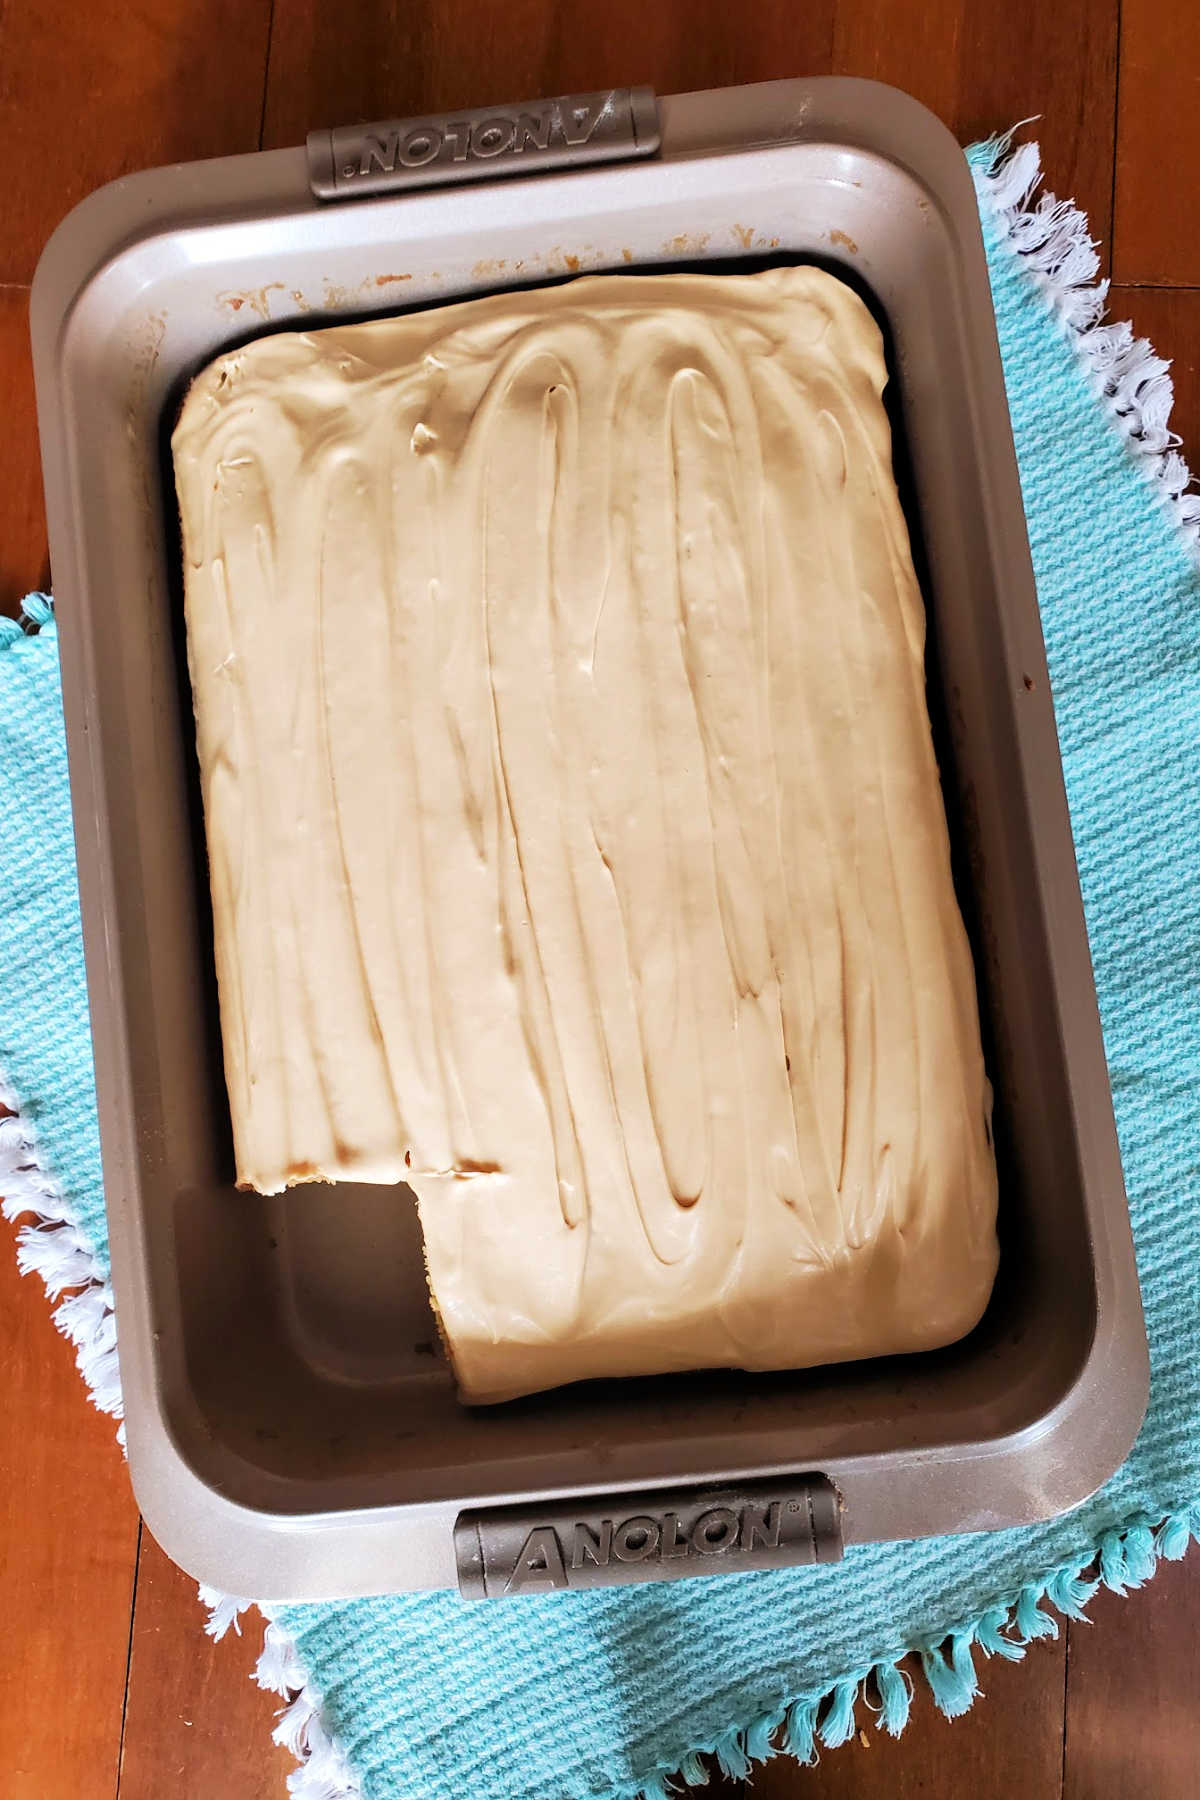 A whole butterscotch sheet cake with 1 slice cut out of it in a metal pan.